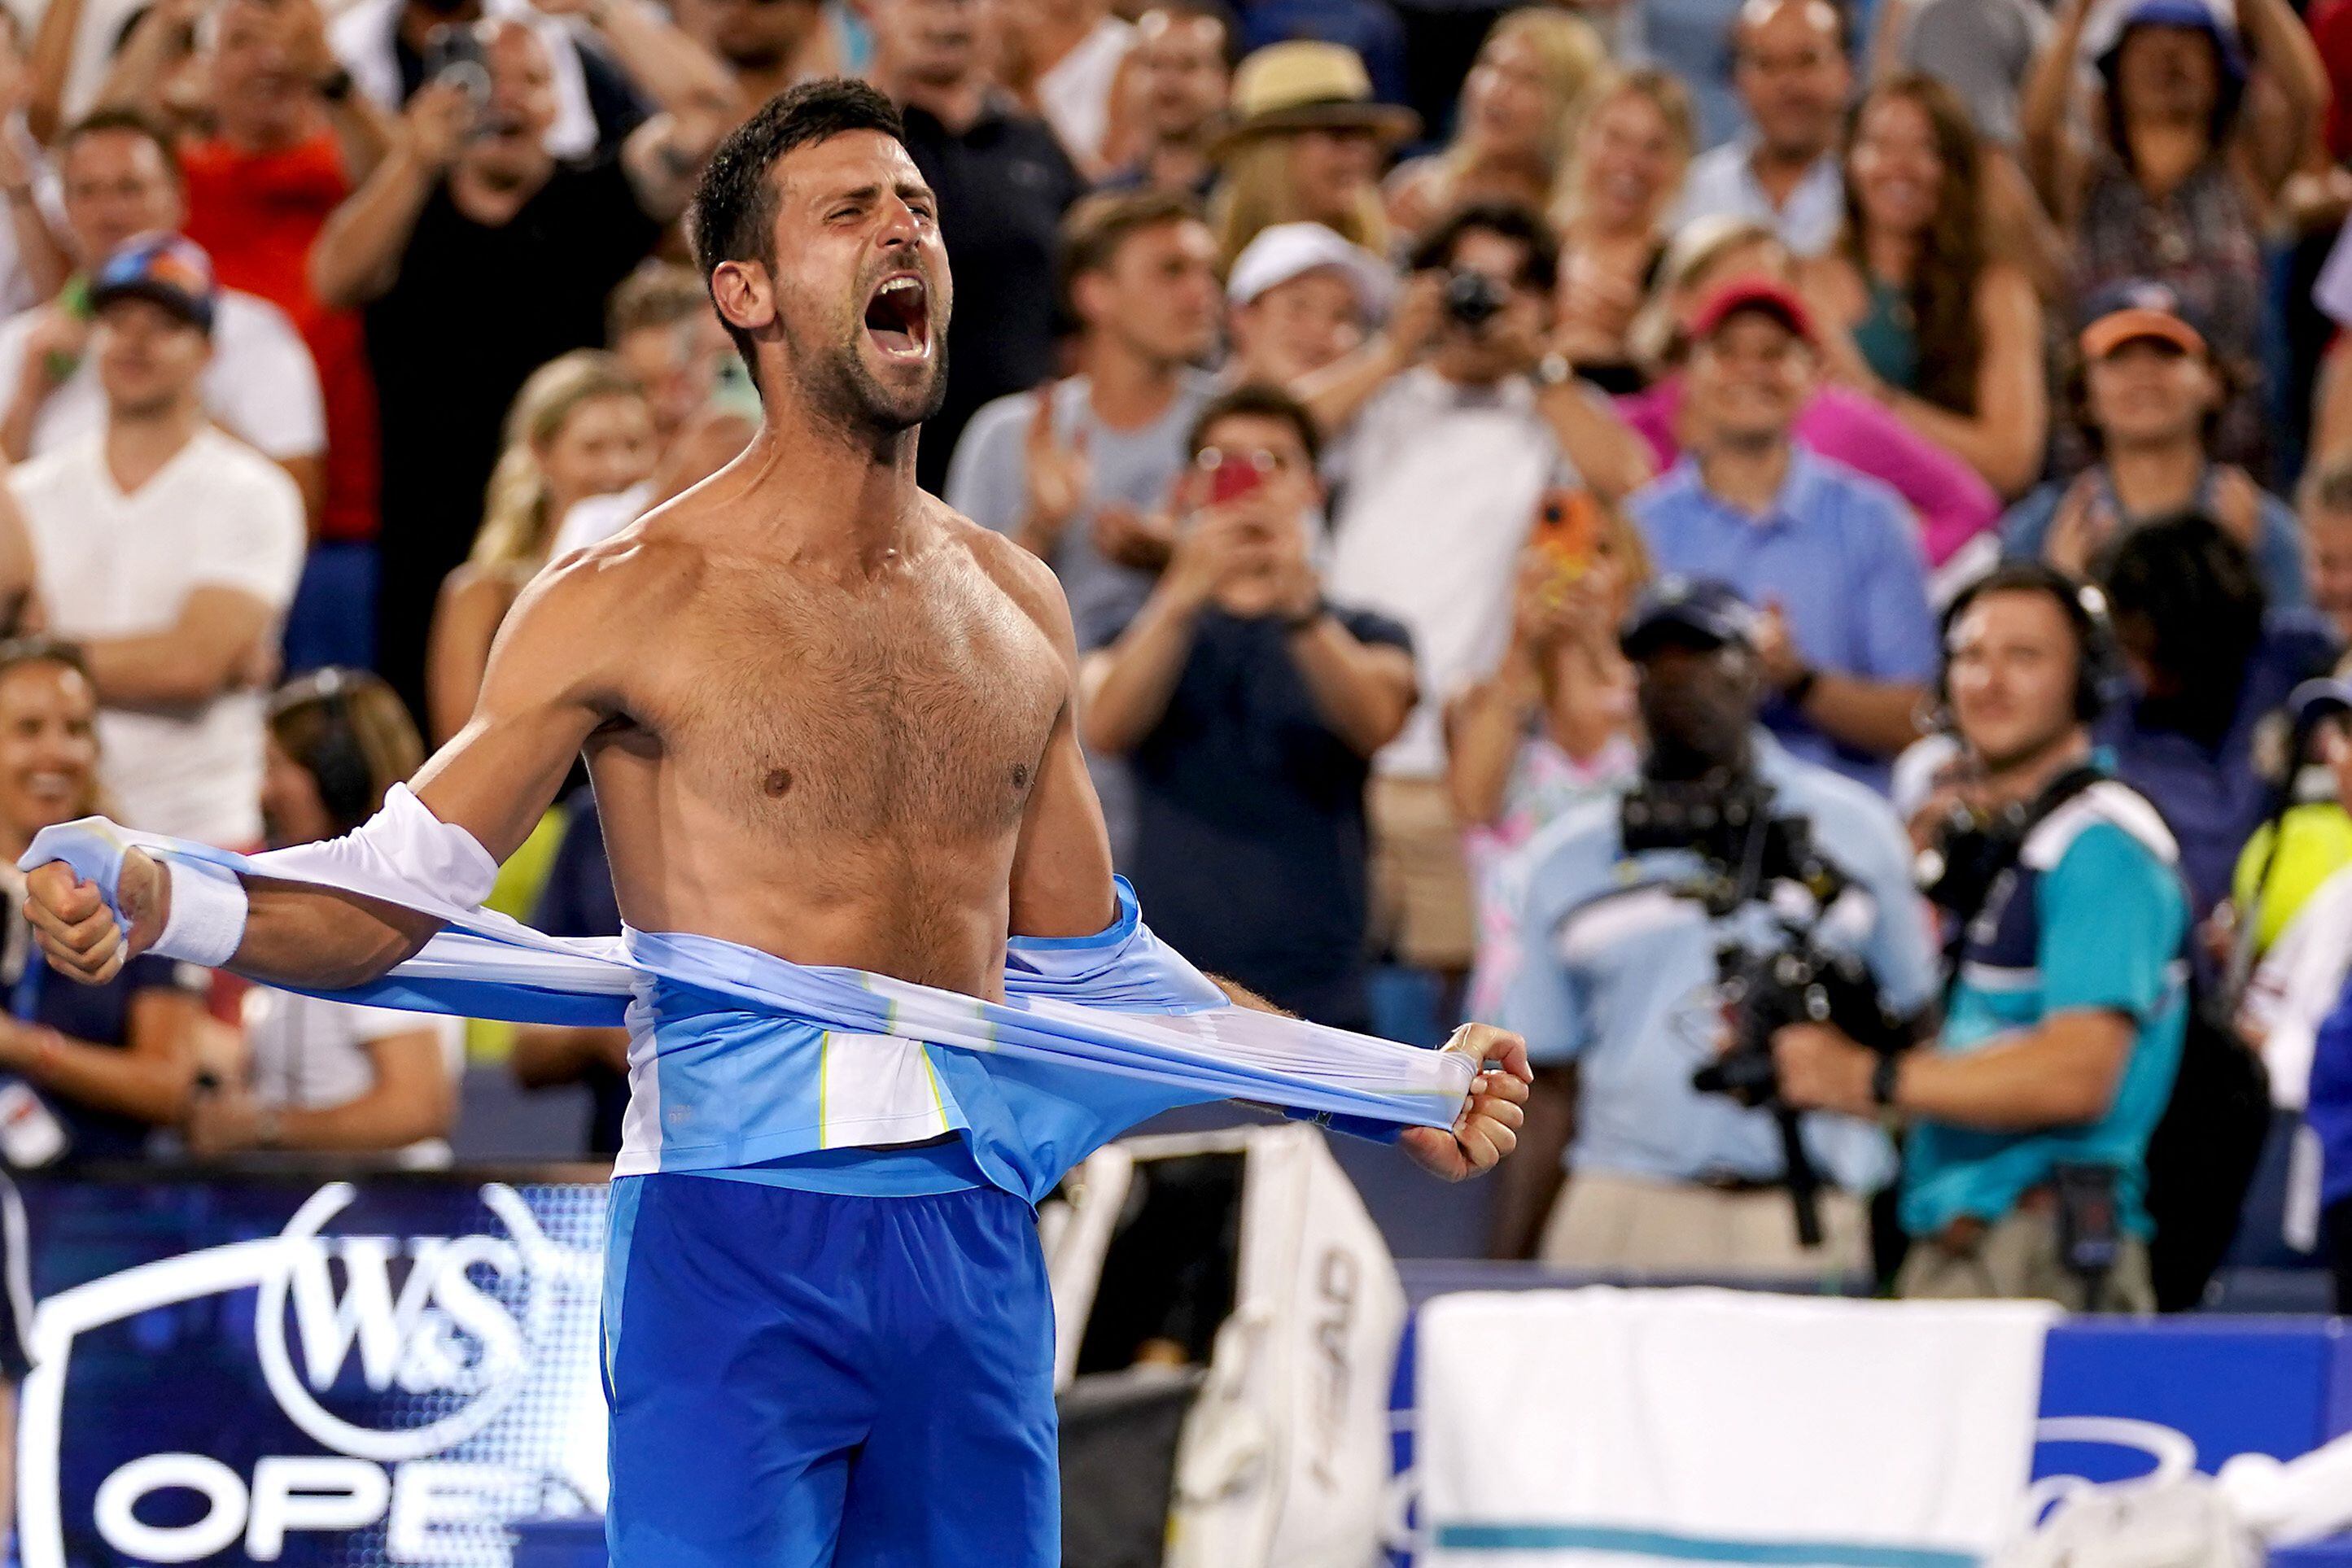 Aug 20, 2023; Mason, OH, USA; Novak Djokovic, of Serbia, rips his shirt in celebration after defeating Carlos Alcaraz, of Spain, at the conclusion of the menÕs singles final of the Western & Southern Open tennis tournament at Lindner Family Tennis Center. Mandatory Credit: Kareem Elgazzar/The Enquirer-USA TODAY Sports